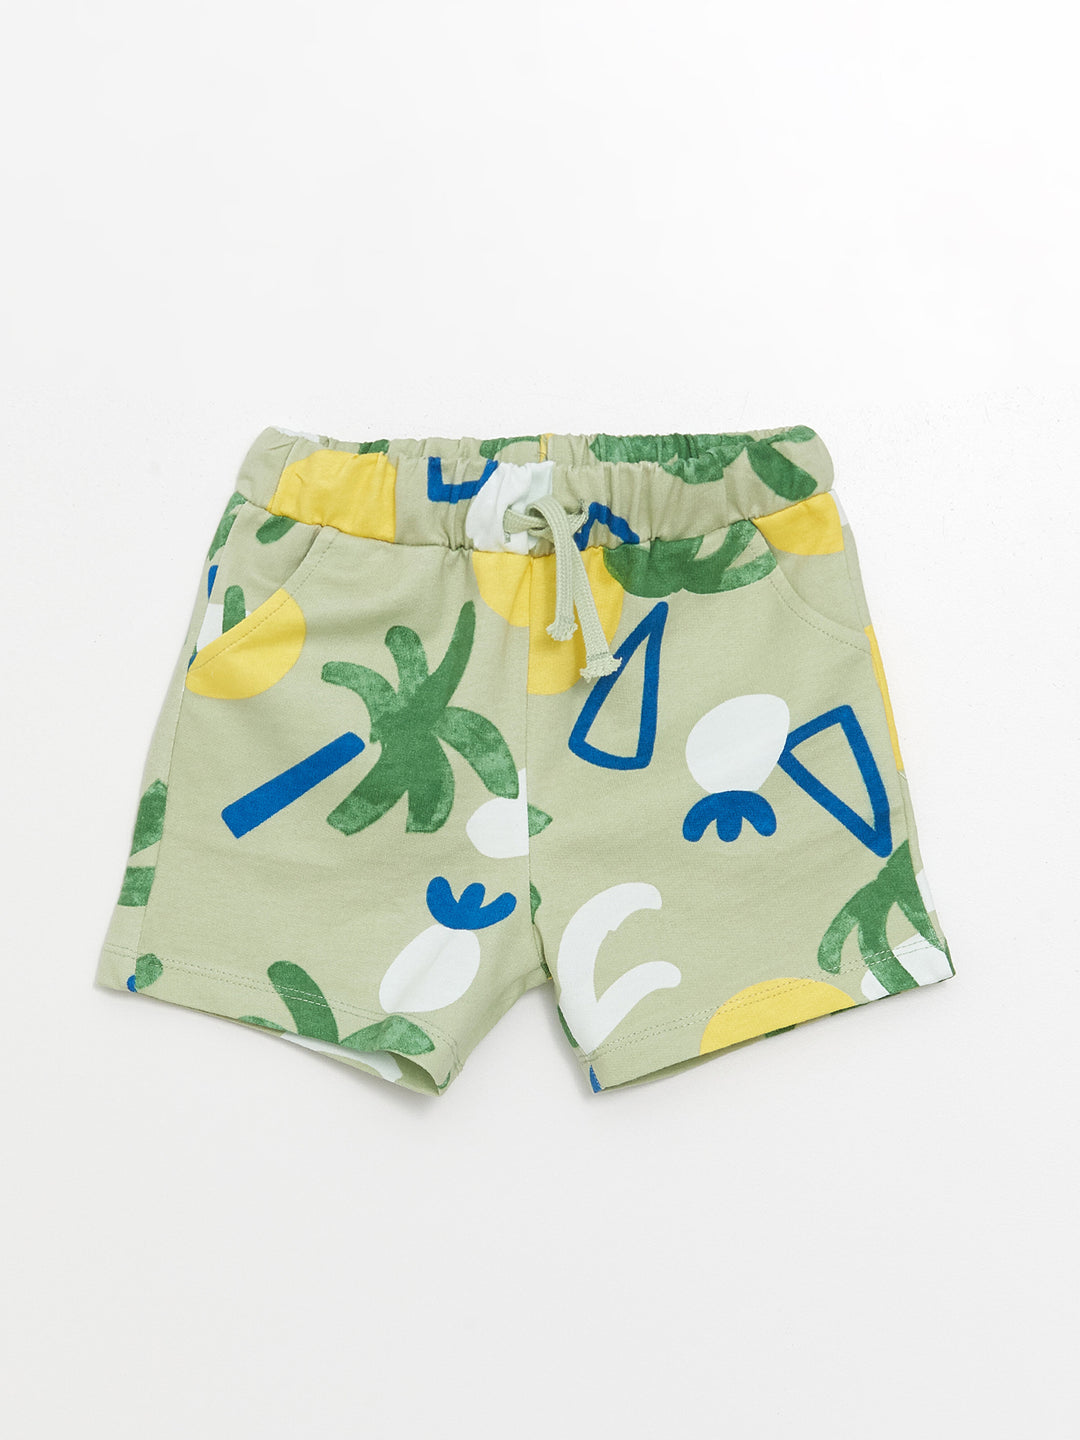 Printed Baby Boy Shorts with Elastic Waist, 2-pack